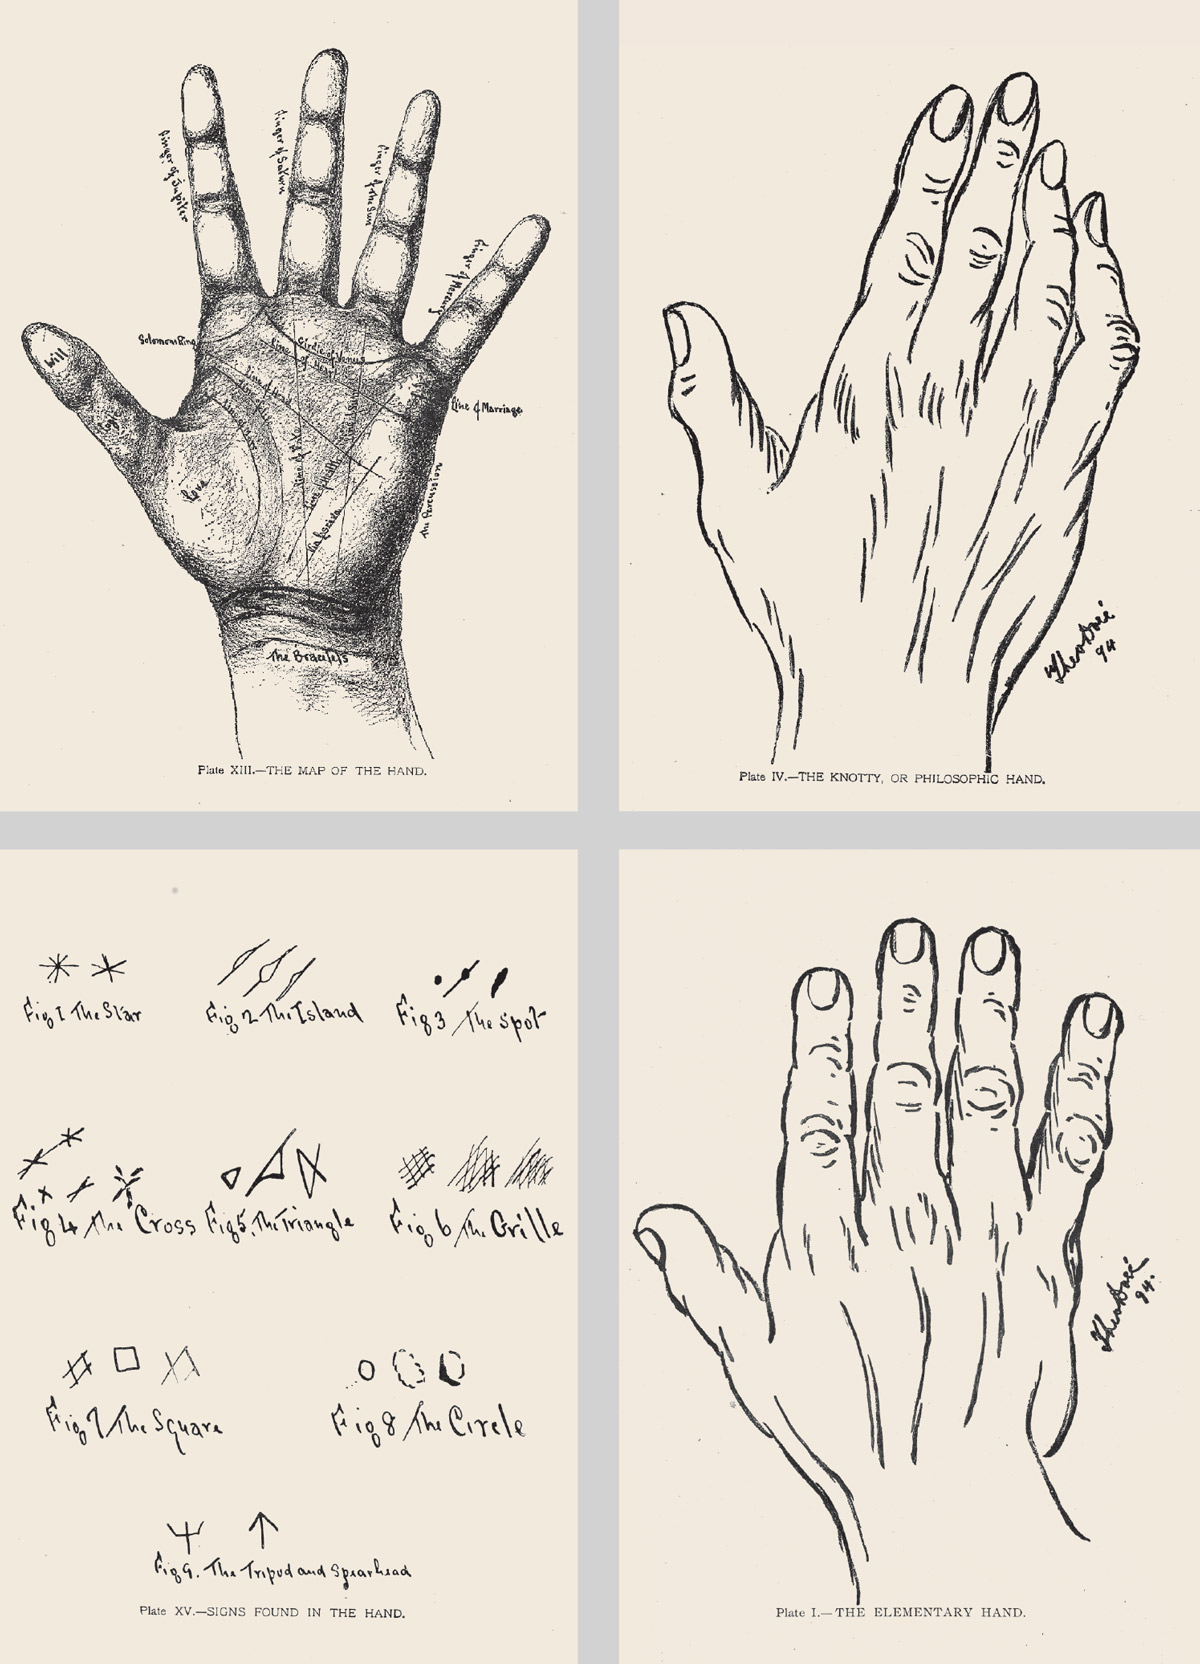 Four illustrations from Cheiro’s eighteen ninety four book “Language of the Hand,” depicting instructional diagrams and interpretive guides for palm reading.